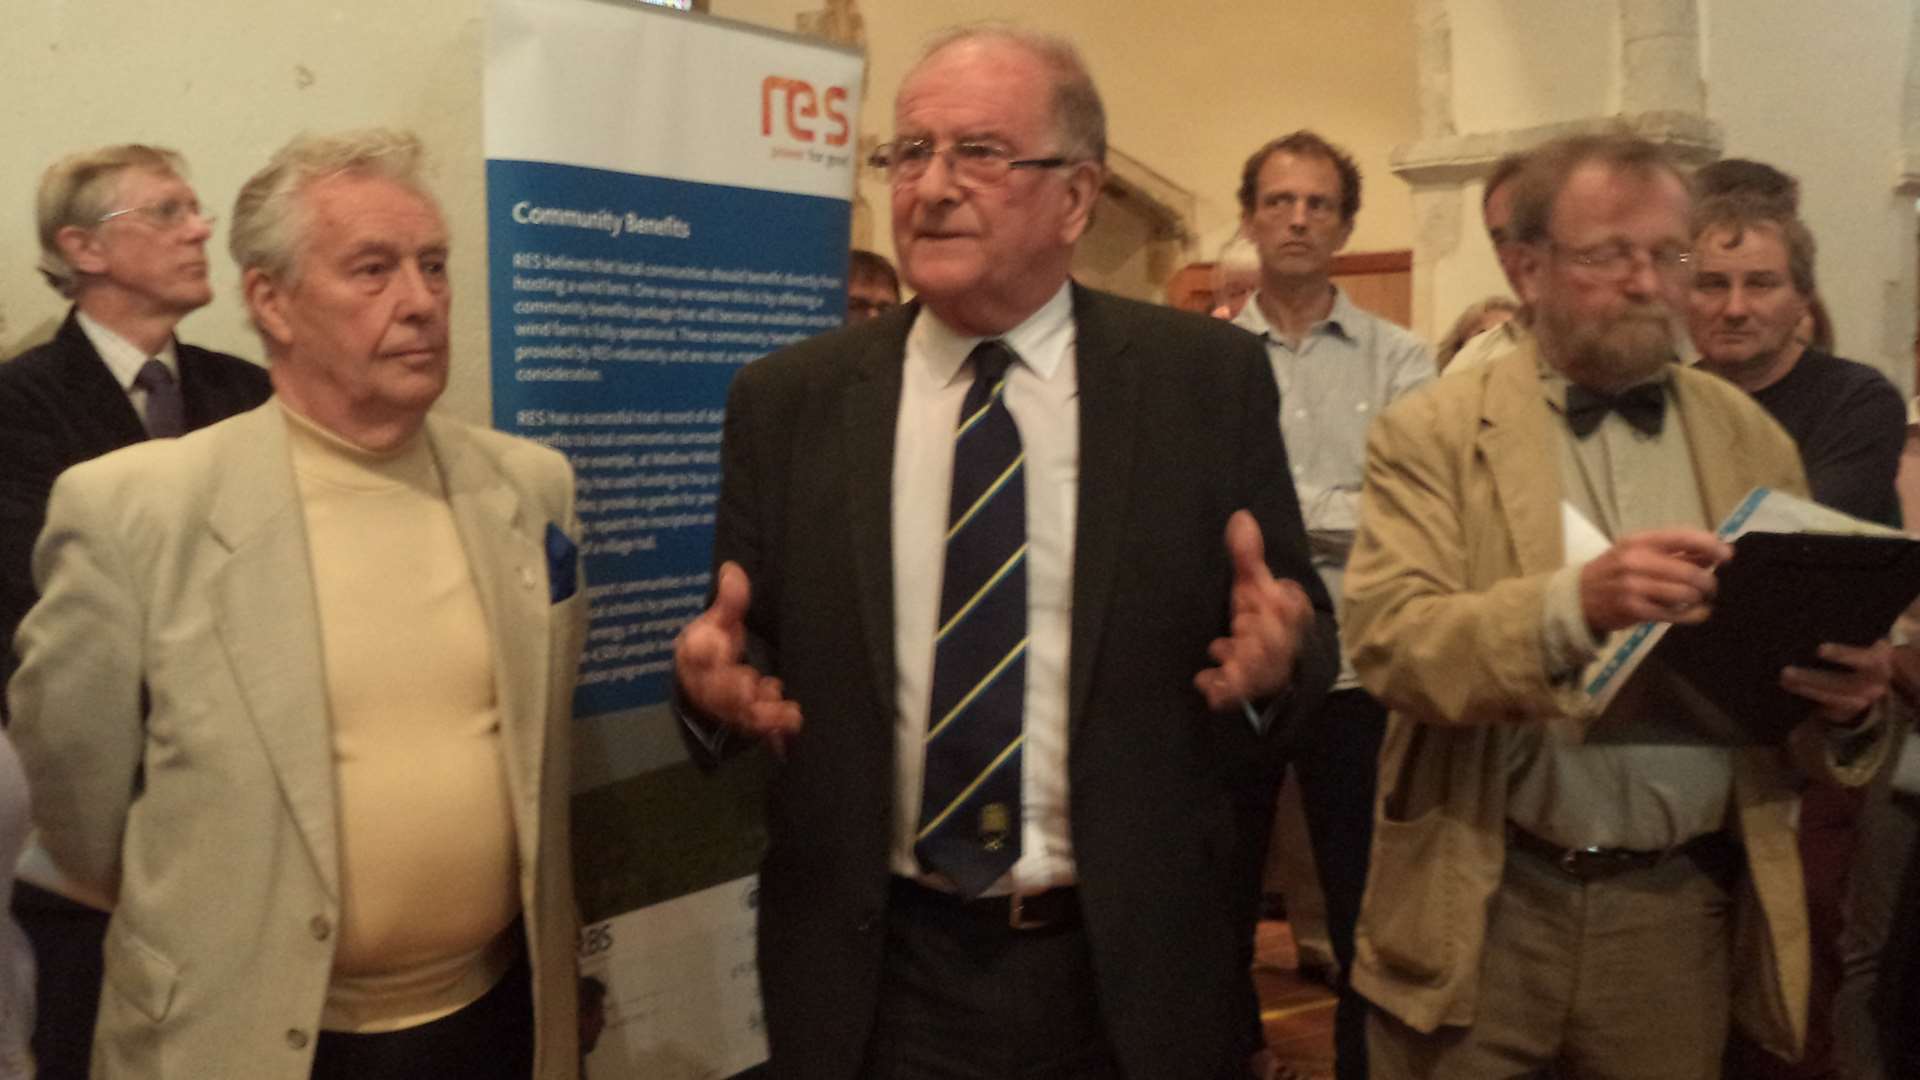 Sir Roger Gale MP spoke against the plans